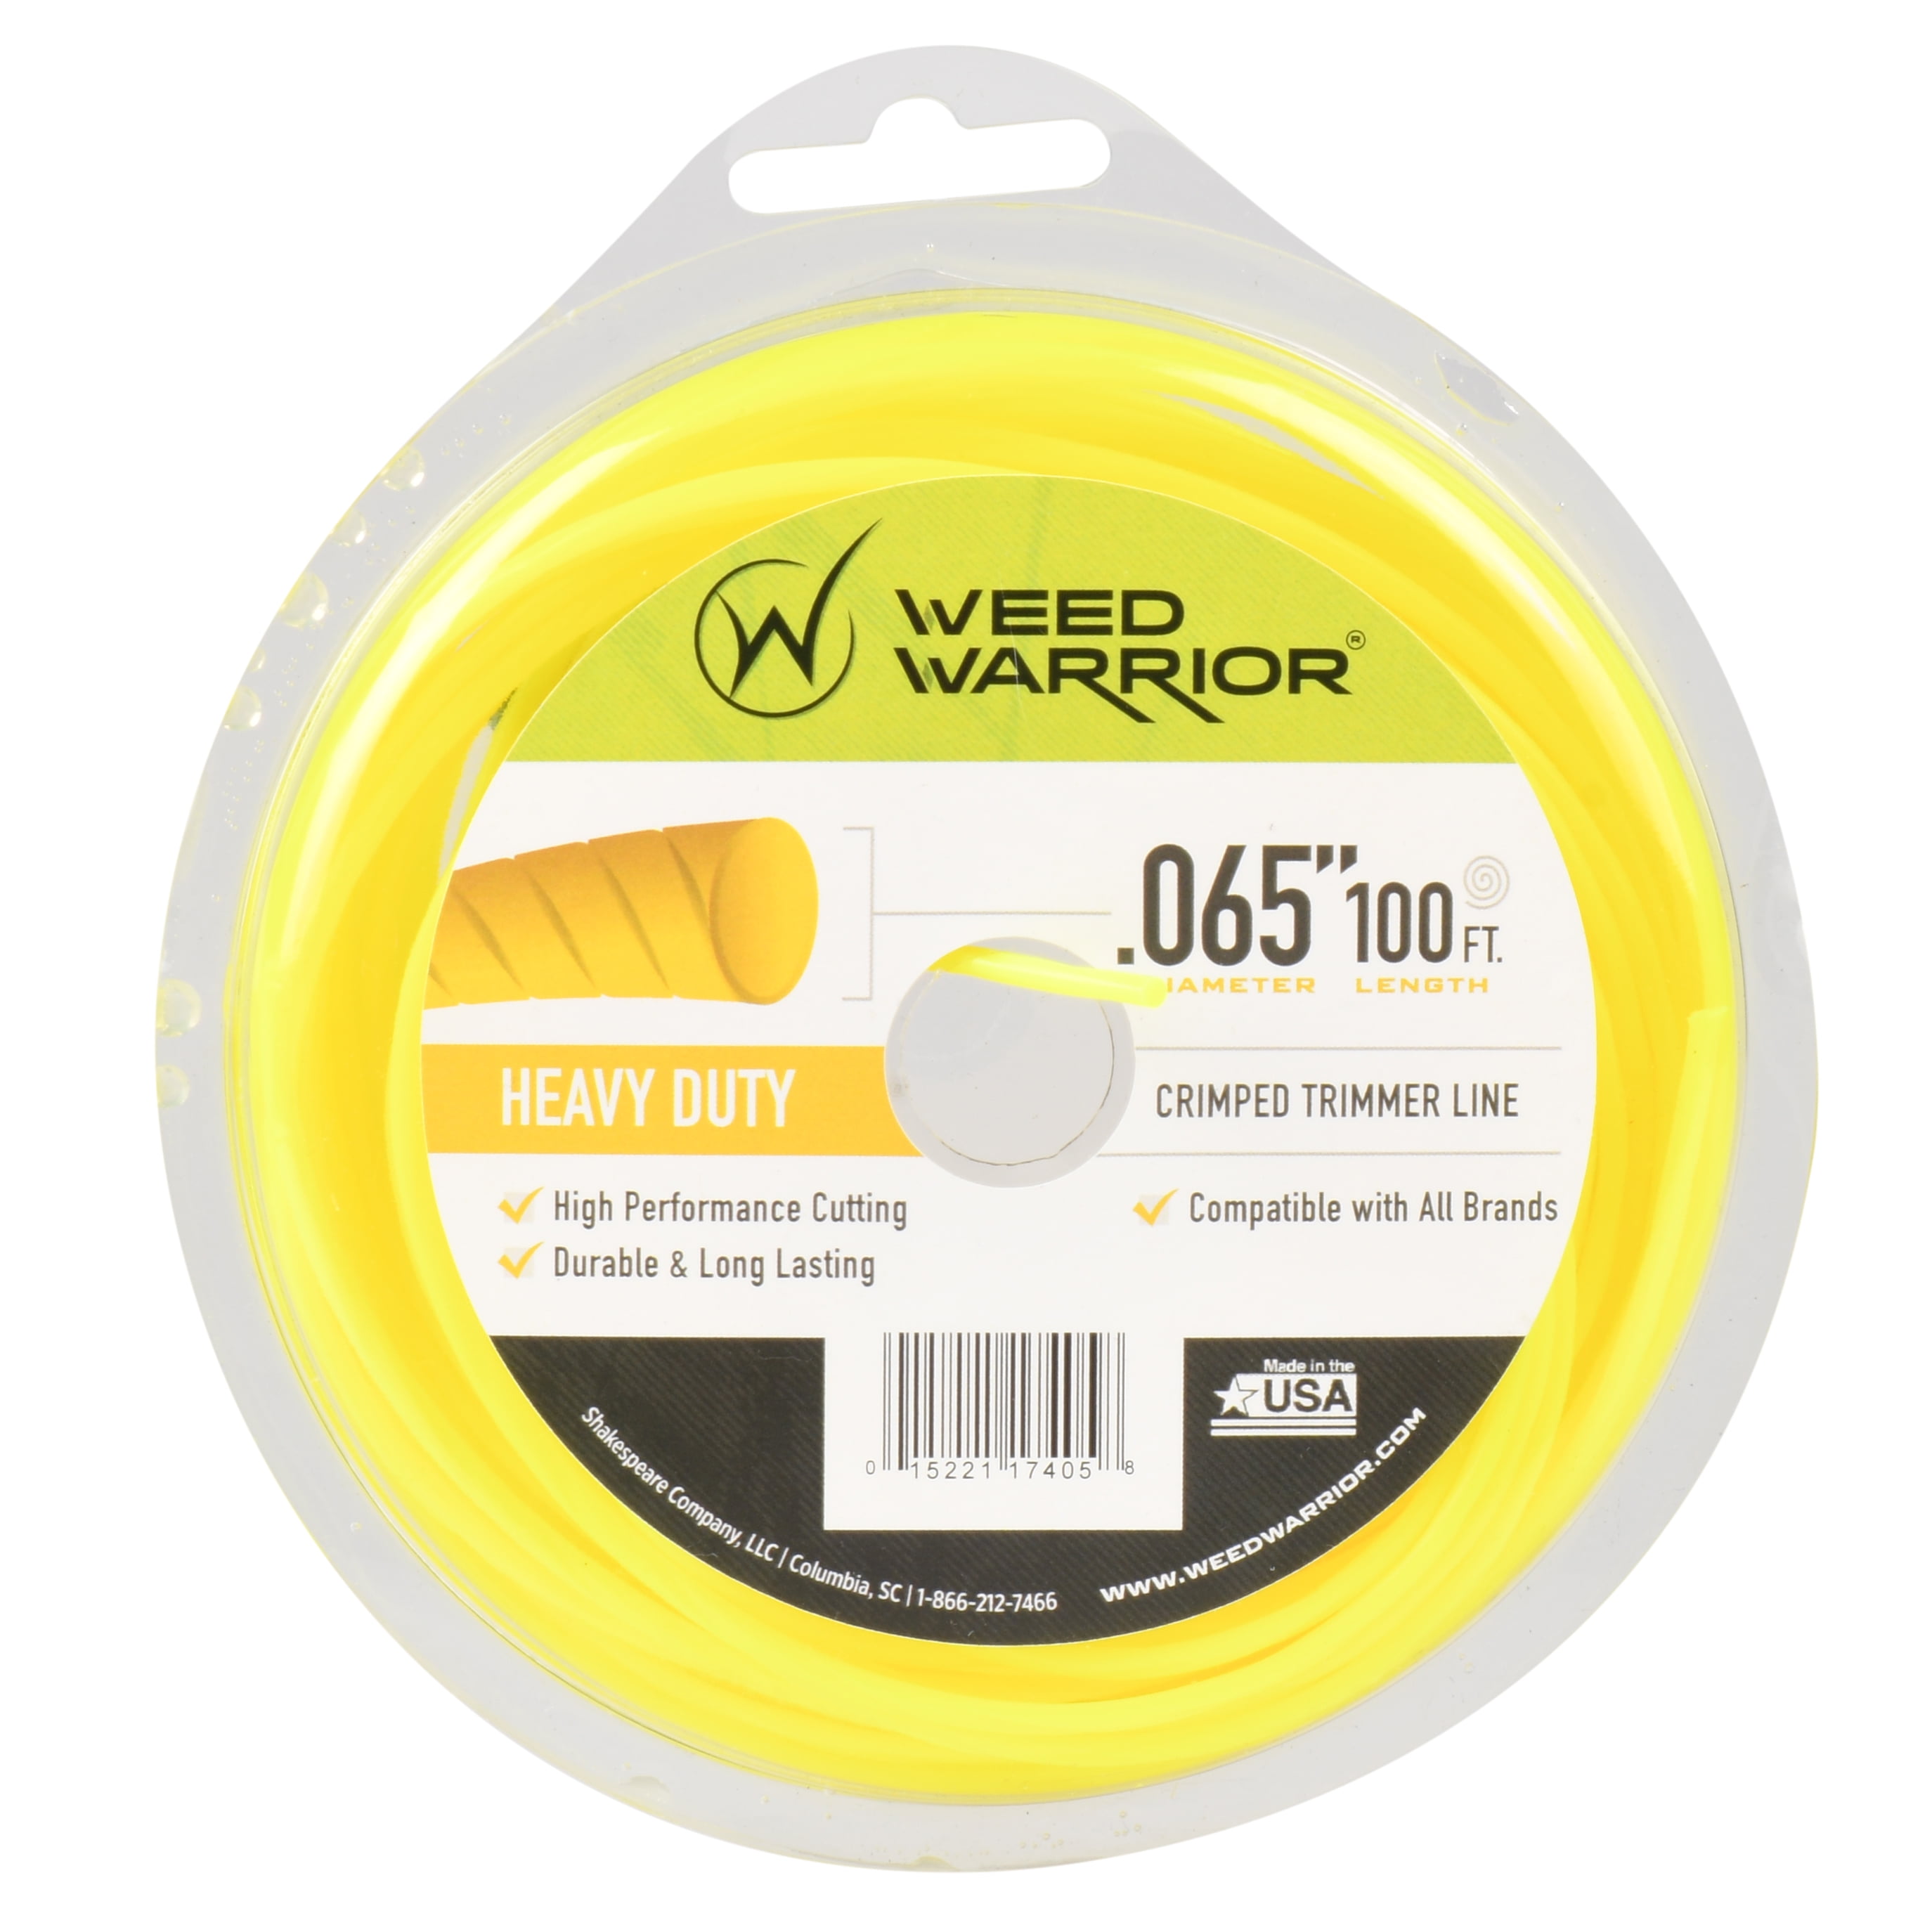 Weed Warrior .065 in. x 100 ft. Heavy Duty Trimmer Line